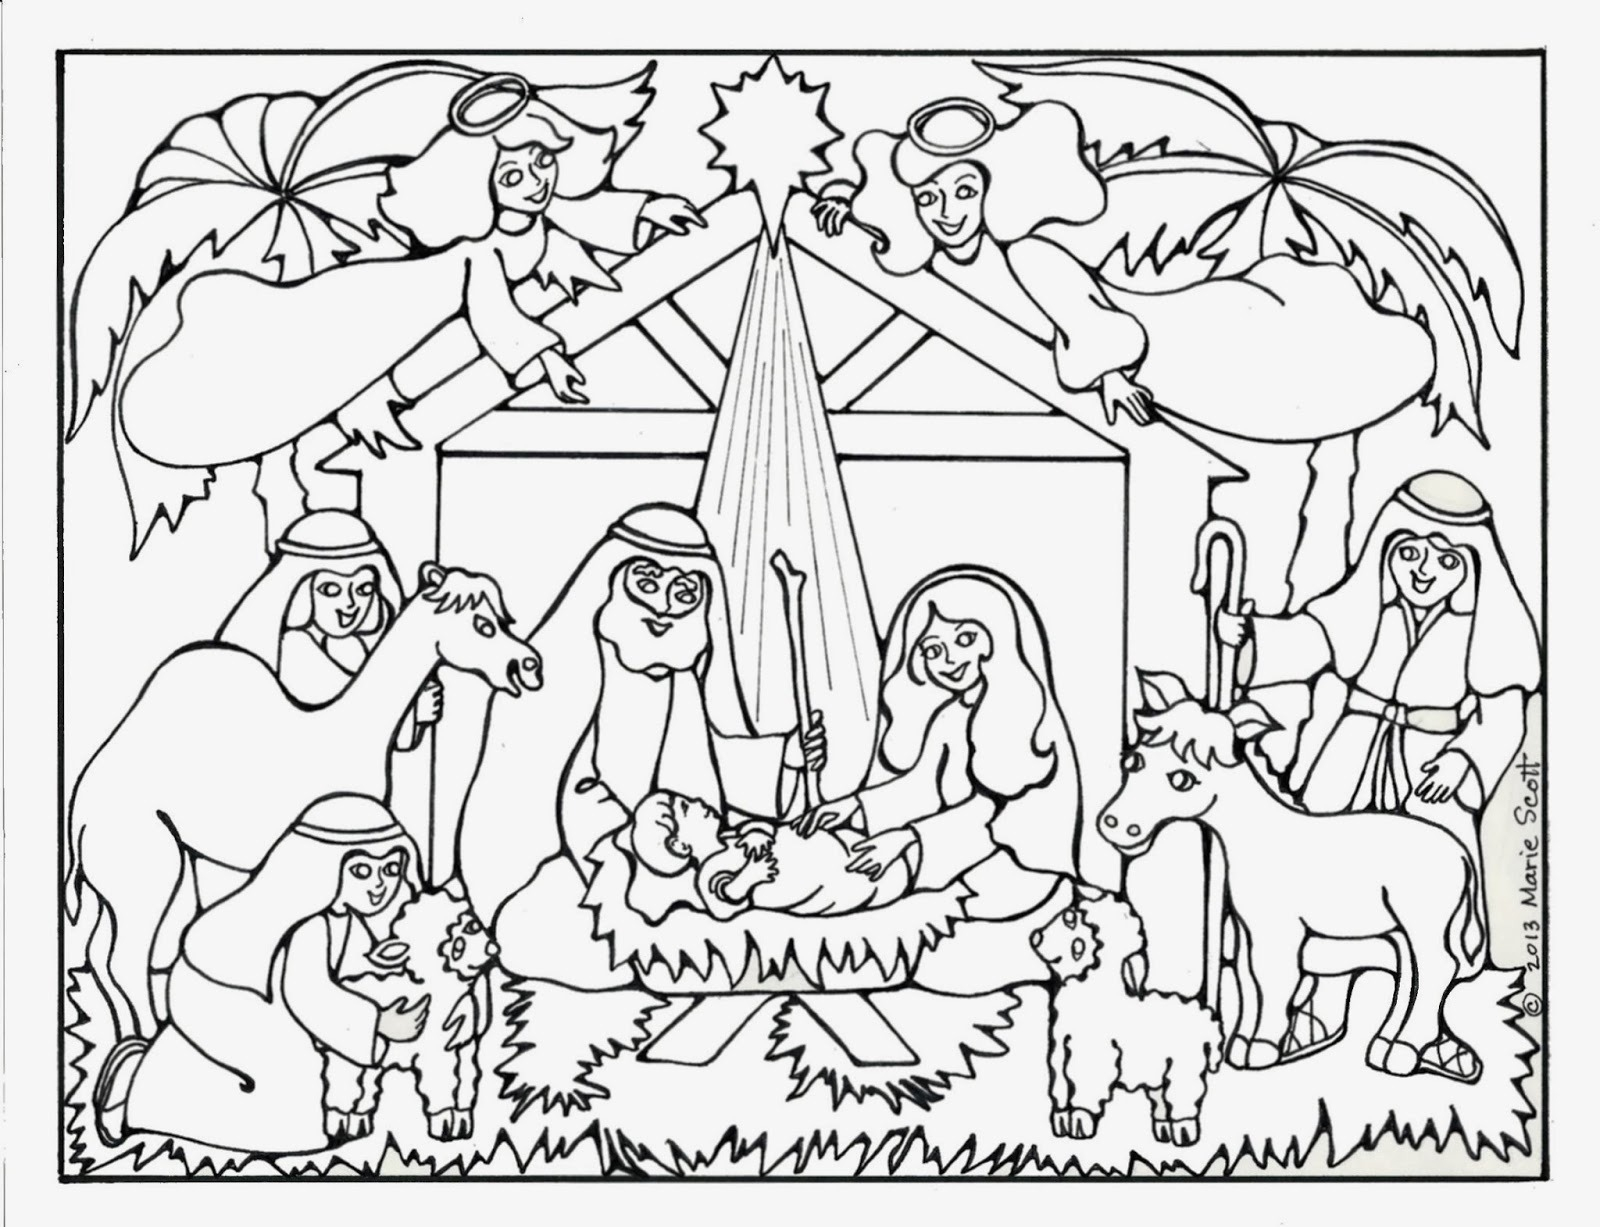 Jesus Christmas Coloring Pages Coloring Pages Christmas Nativity Coloring Pages For Adults To